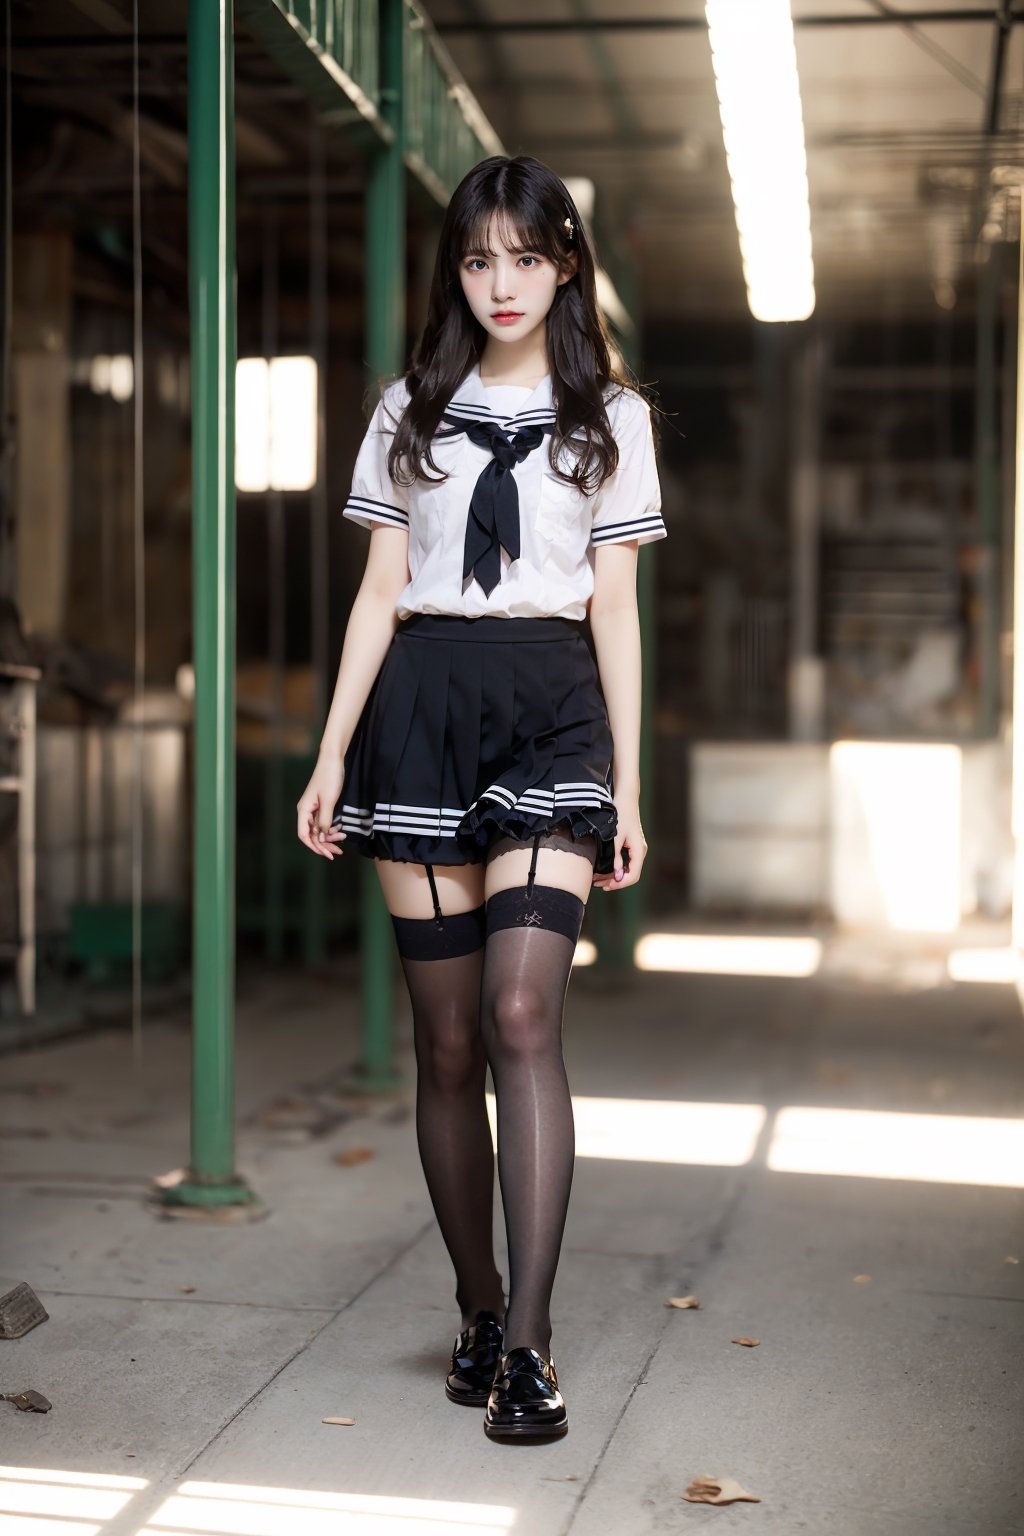 one girl, solo , full body,  walking side view,   ((Gigantic breats)) (from_below:1.4) ,  real girl, 16 years old Japanese girl , massy black hair , long legs, glomar model body. ((black sheer tight stocking)) , Black sailor black school girl uniform, very short skirts , white panty,  school shoes, shy innocent face ,  in dark old abandoned dark indoor factory, perfect hands,  visible skin detail, skin fuzz, glossy skin, natural_lighting , Detailedface, 1 girl,  ,Detailedface,1 girl